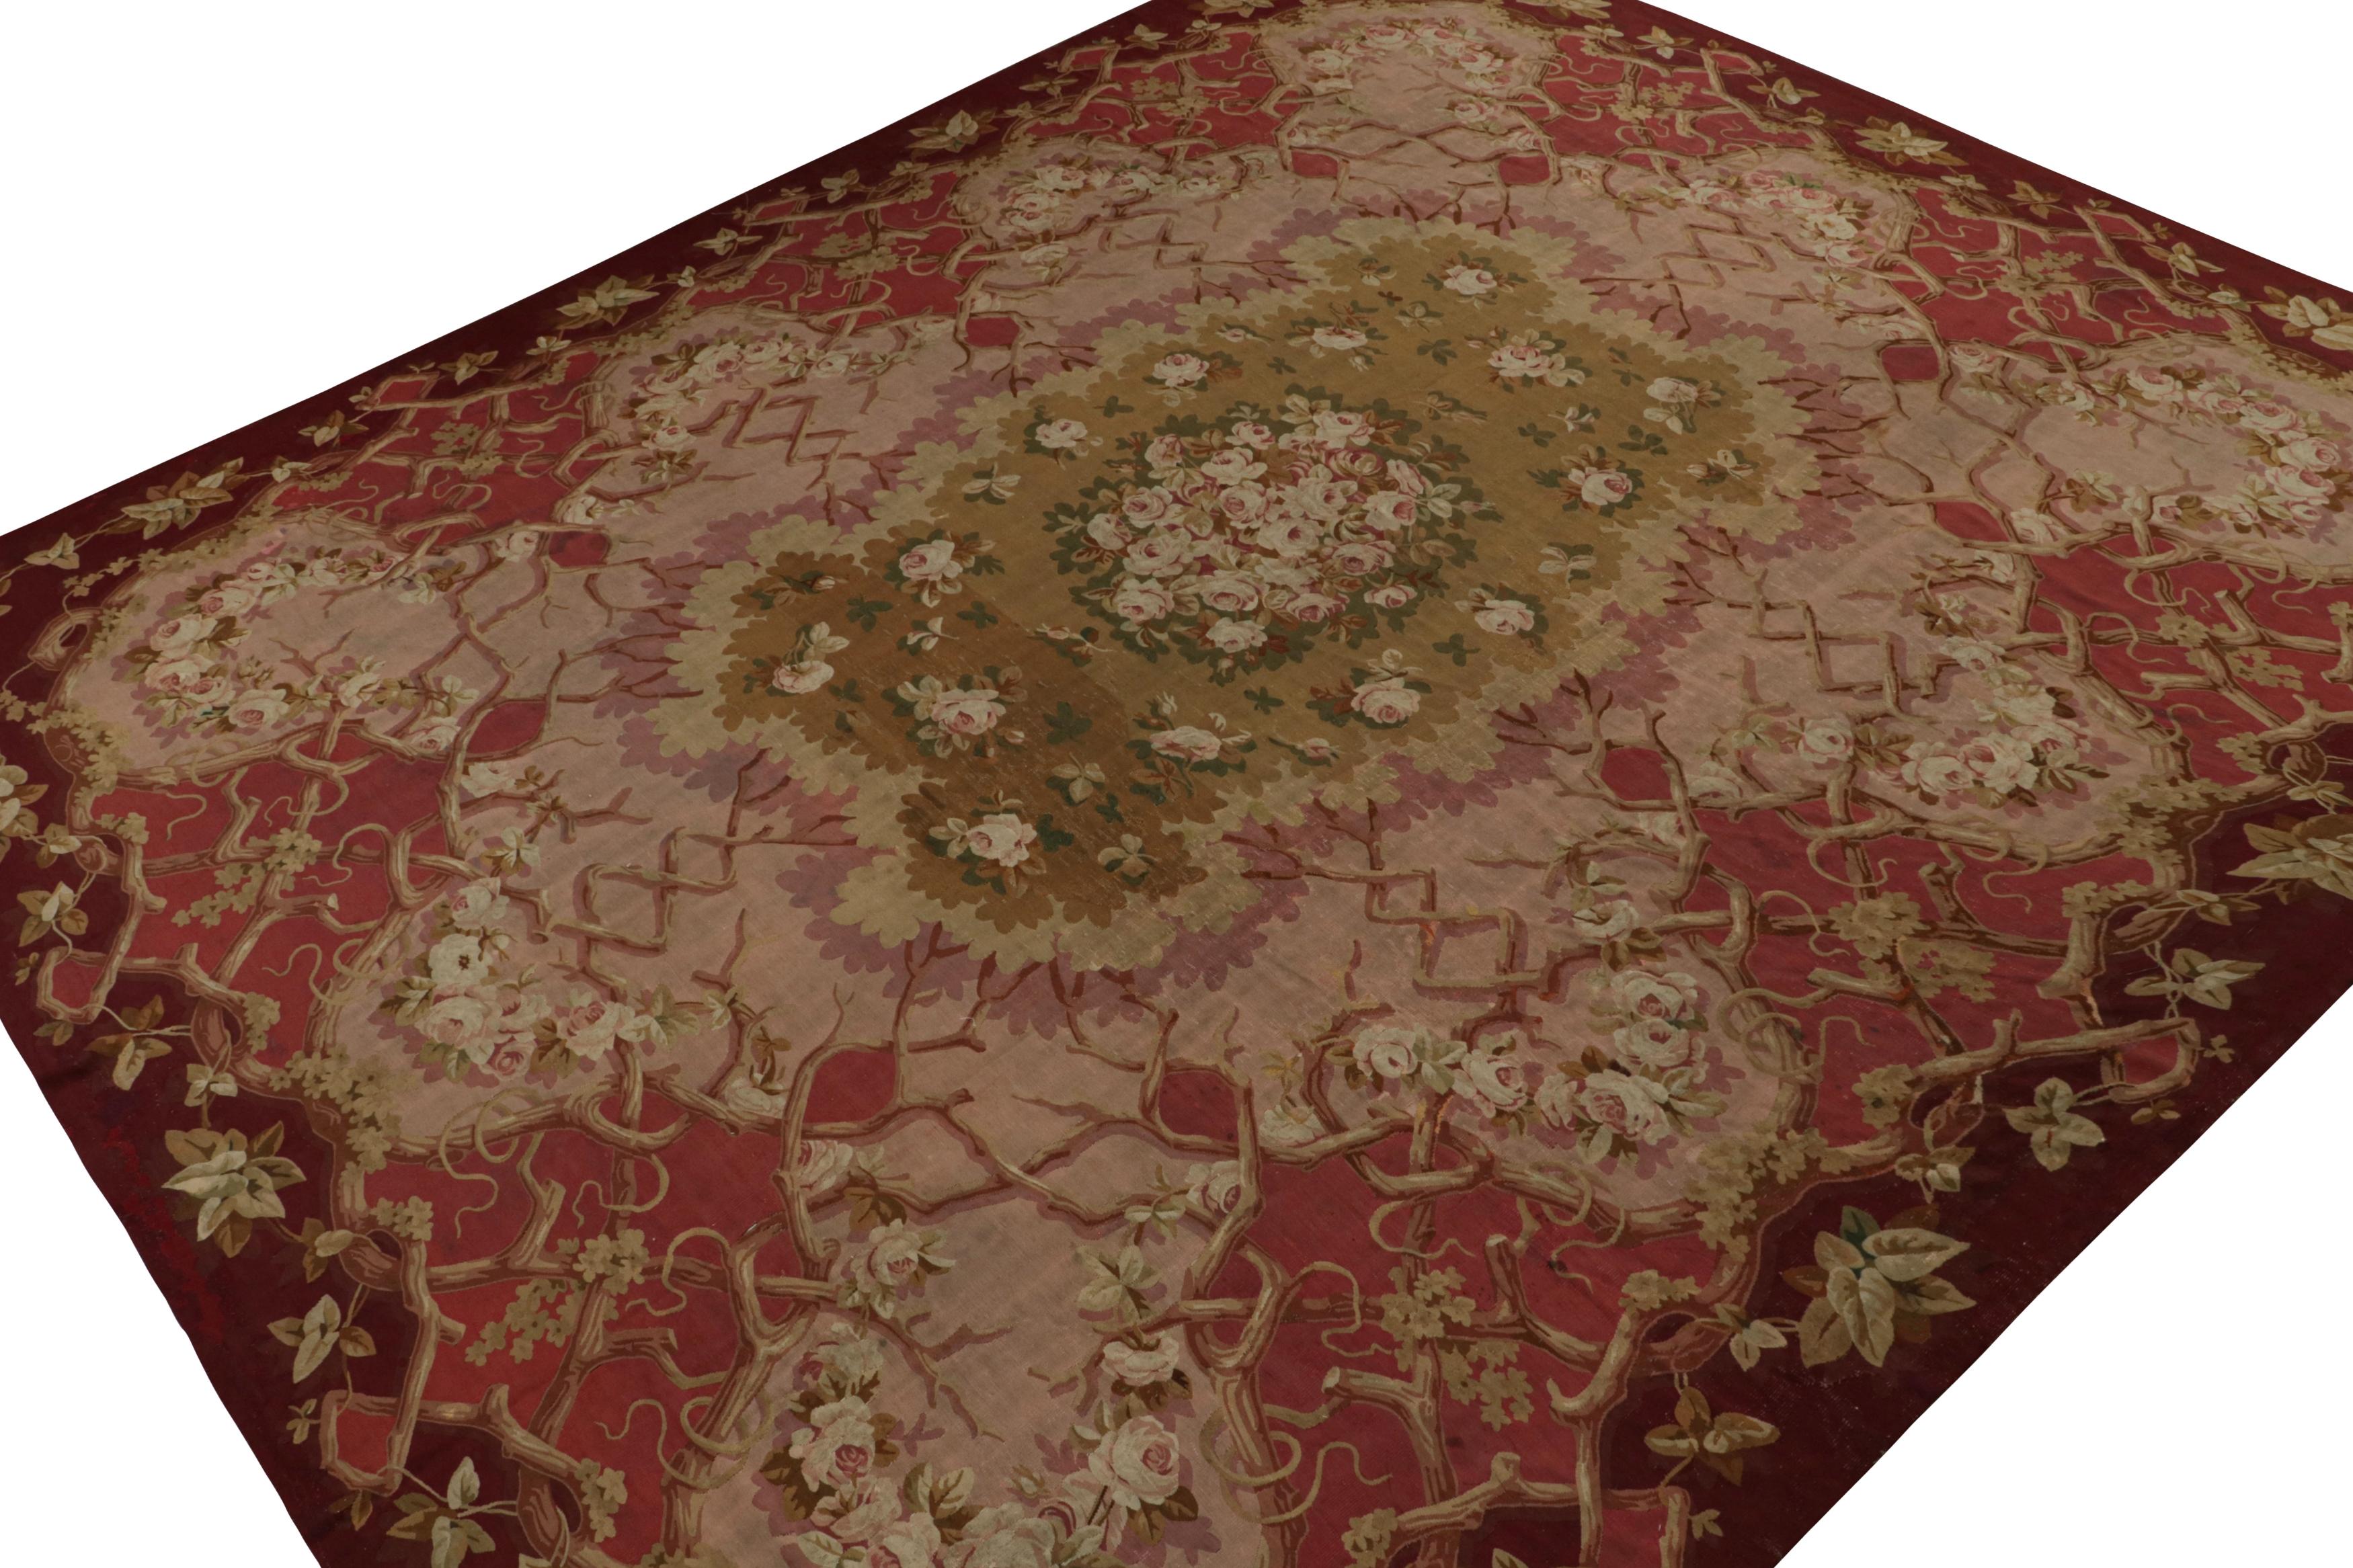 Handwoven in wool circa 1890-1900, this 13x16 antique Aubusson flatweave rug enjoys rich tones of red, brown and pink, with floral patterns in the field and the border. 

On the design: 

Admirers of the craft will note this is a collectible